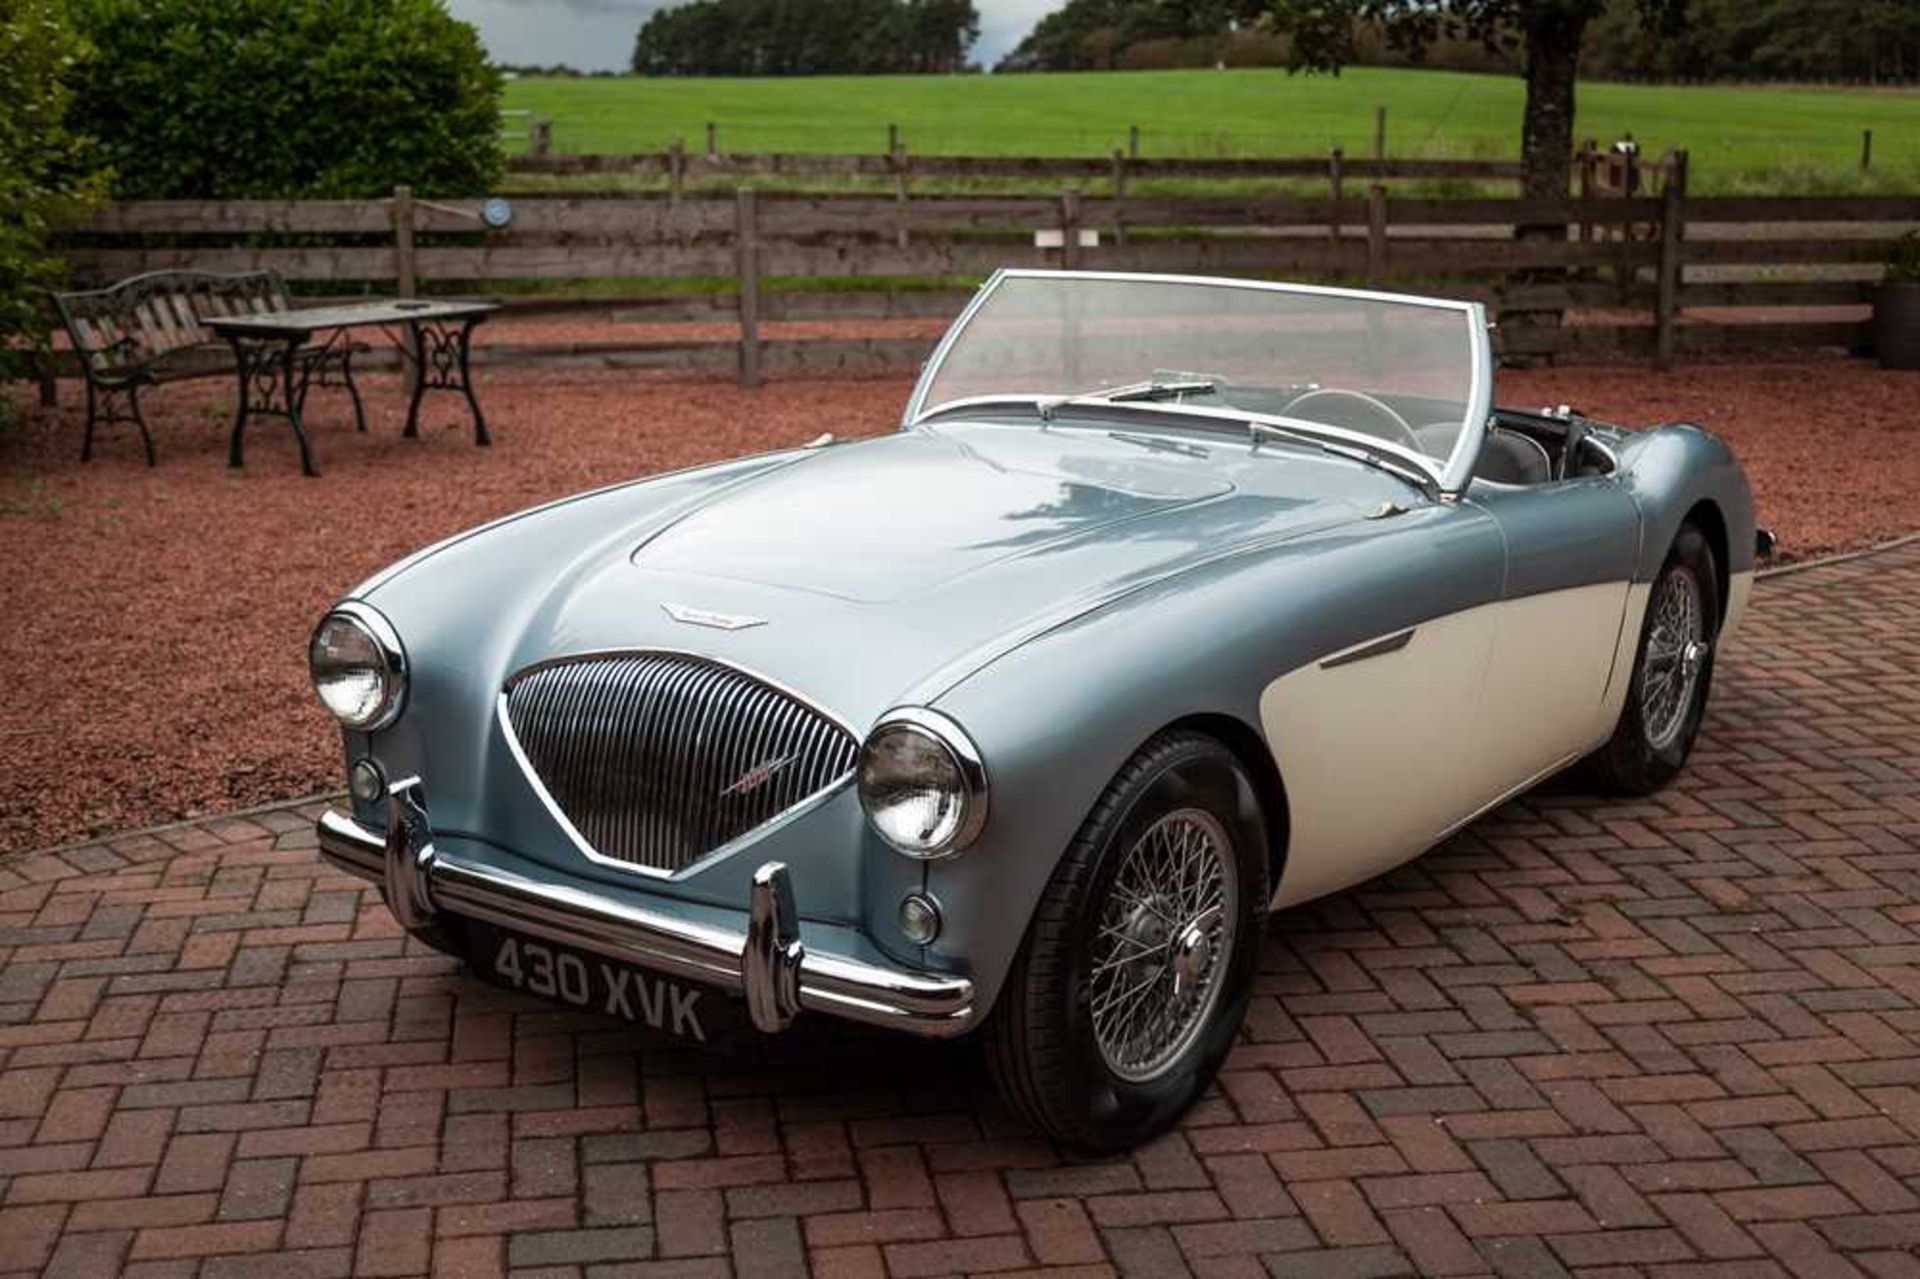 1955 Austin-Healey 100/4 Subtly Upgraded with 5-Speed Transmission and Front Disc Brakes - Image 13 of 54